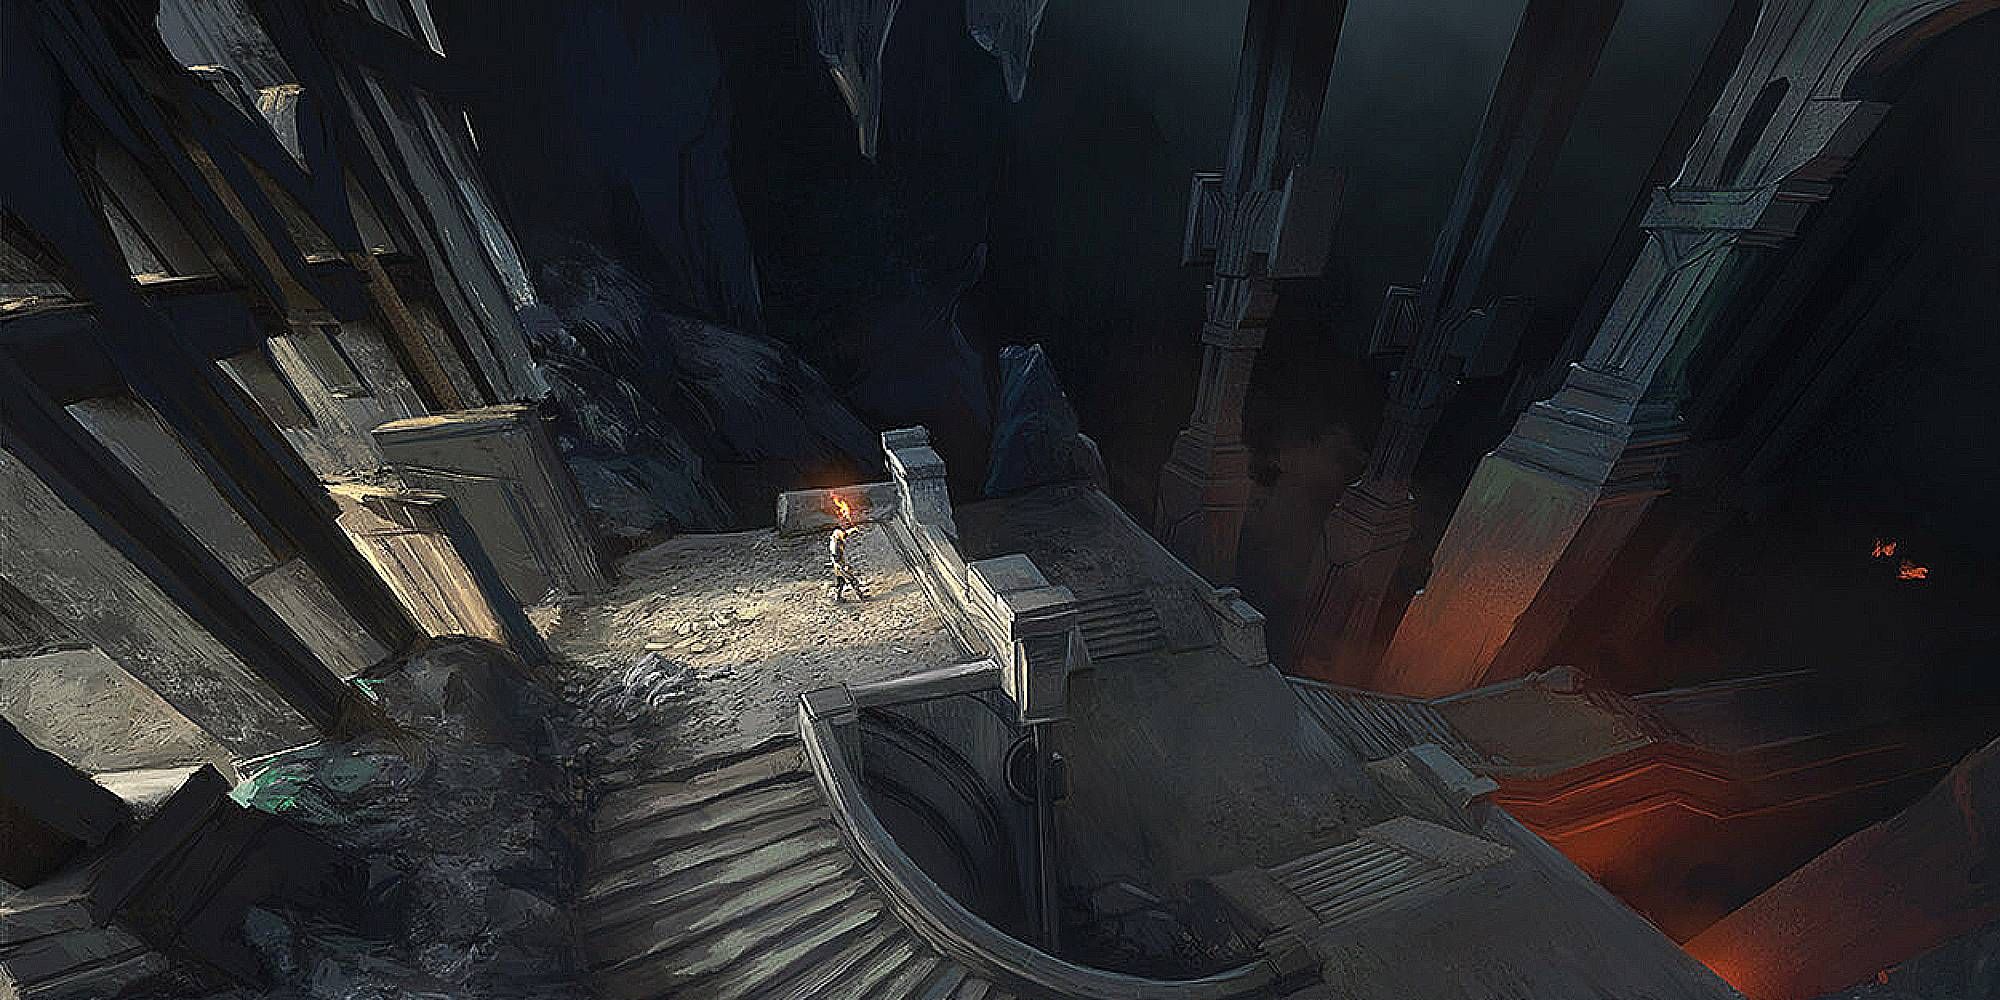 A lone figure holds a torch in a cavernous dark dungeon